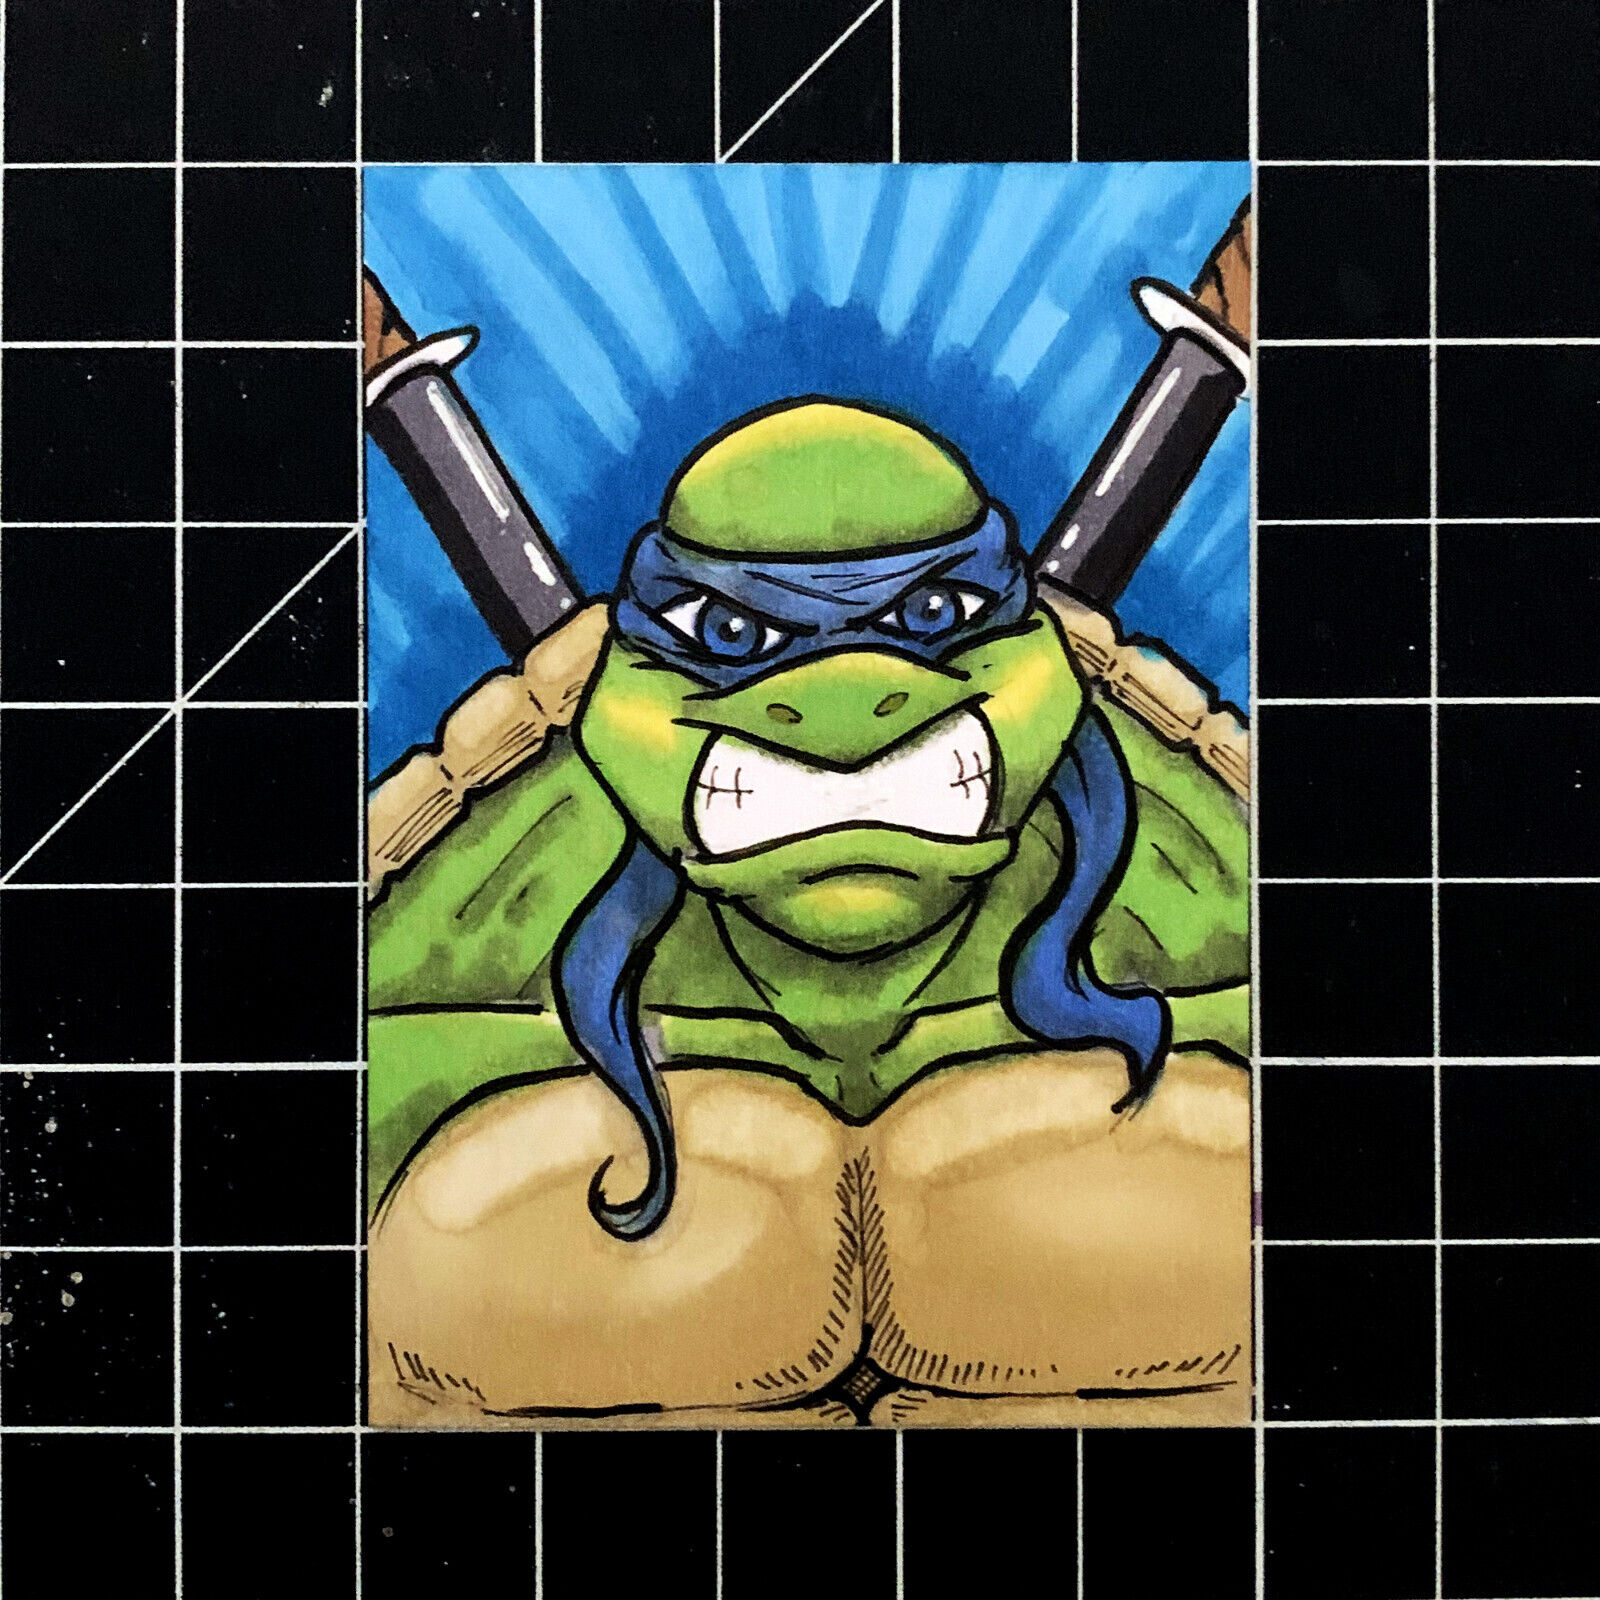 1 of 1 Extremely Rare Sketch Card of TMNT Leonardo by Dante H Guerra Very Hot